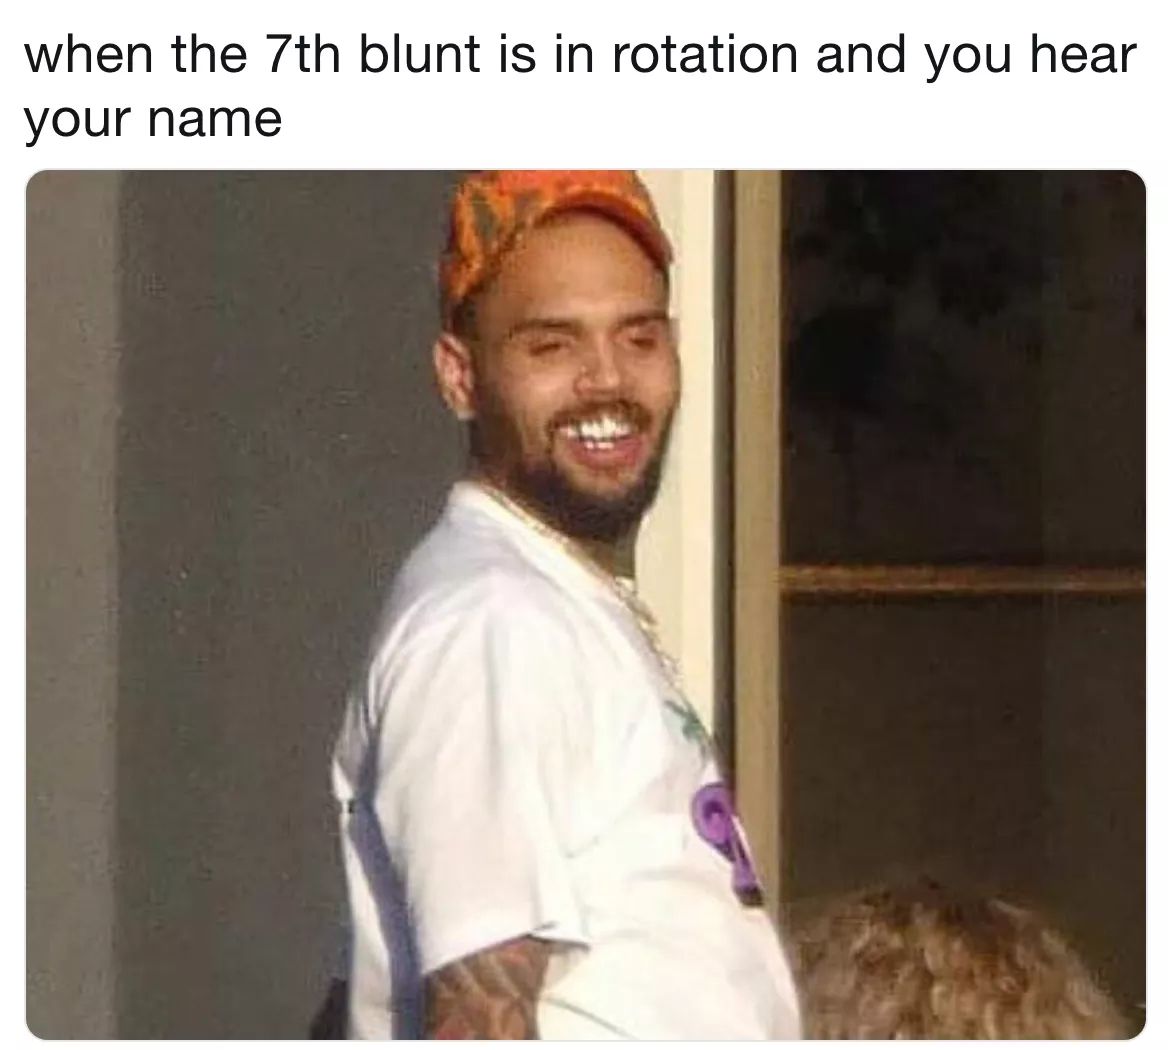 chris brown lil dicky meme - when the 7th blunt is in rotation and you hear your name